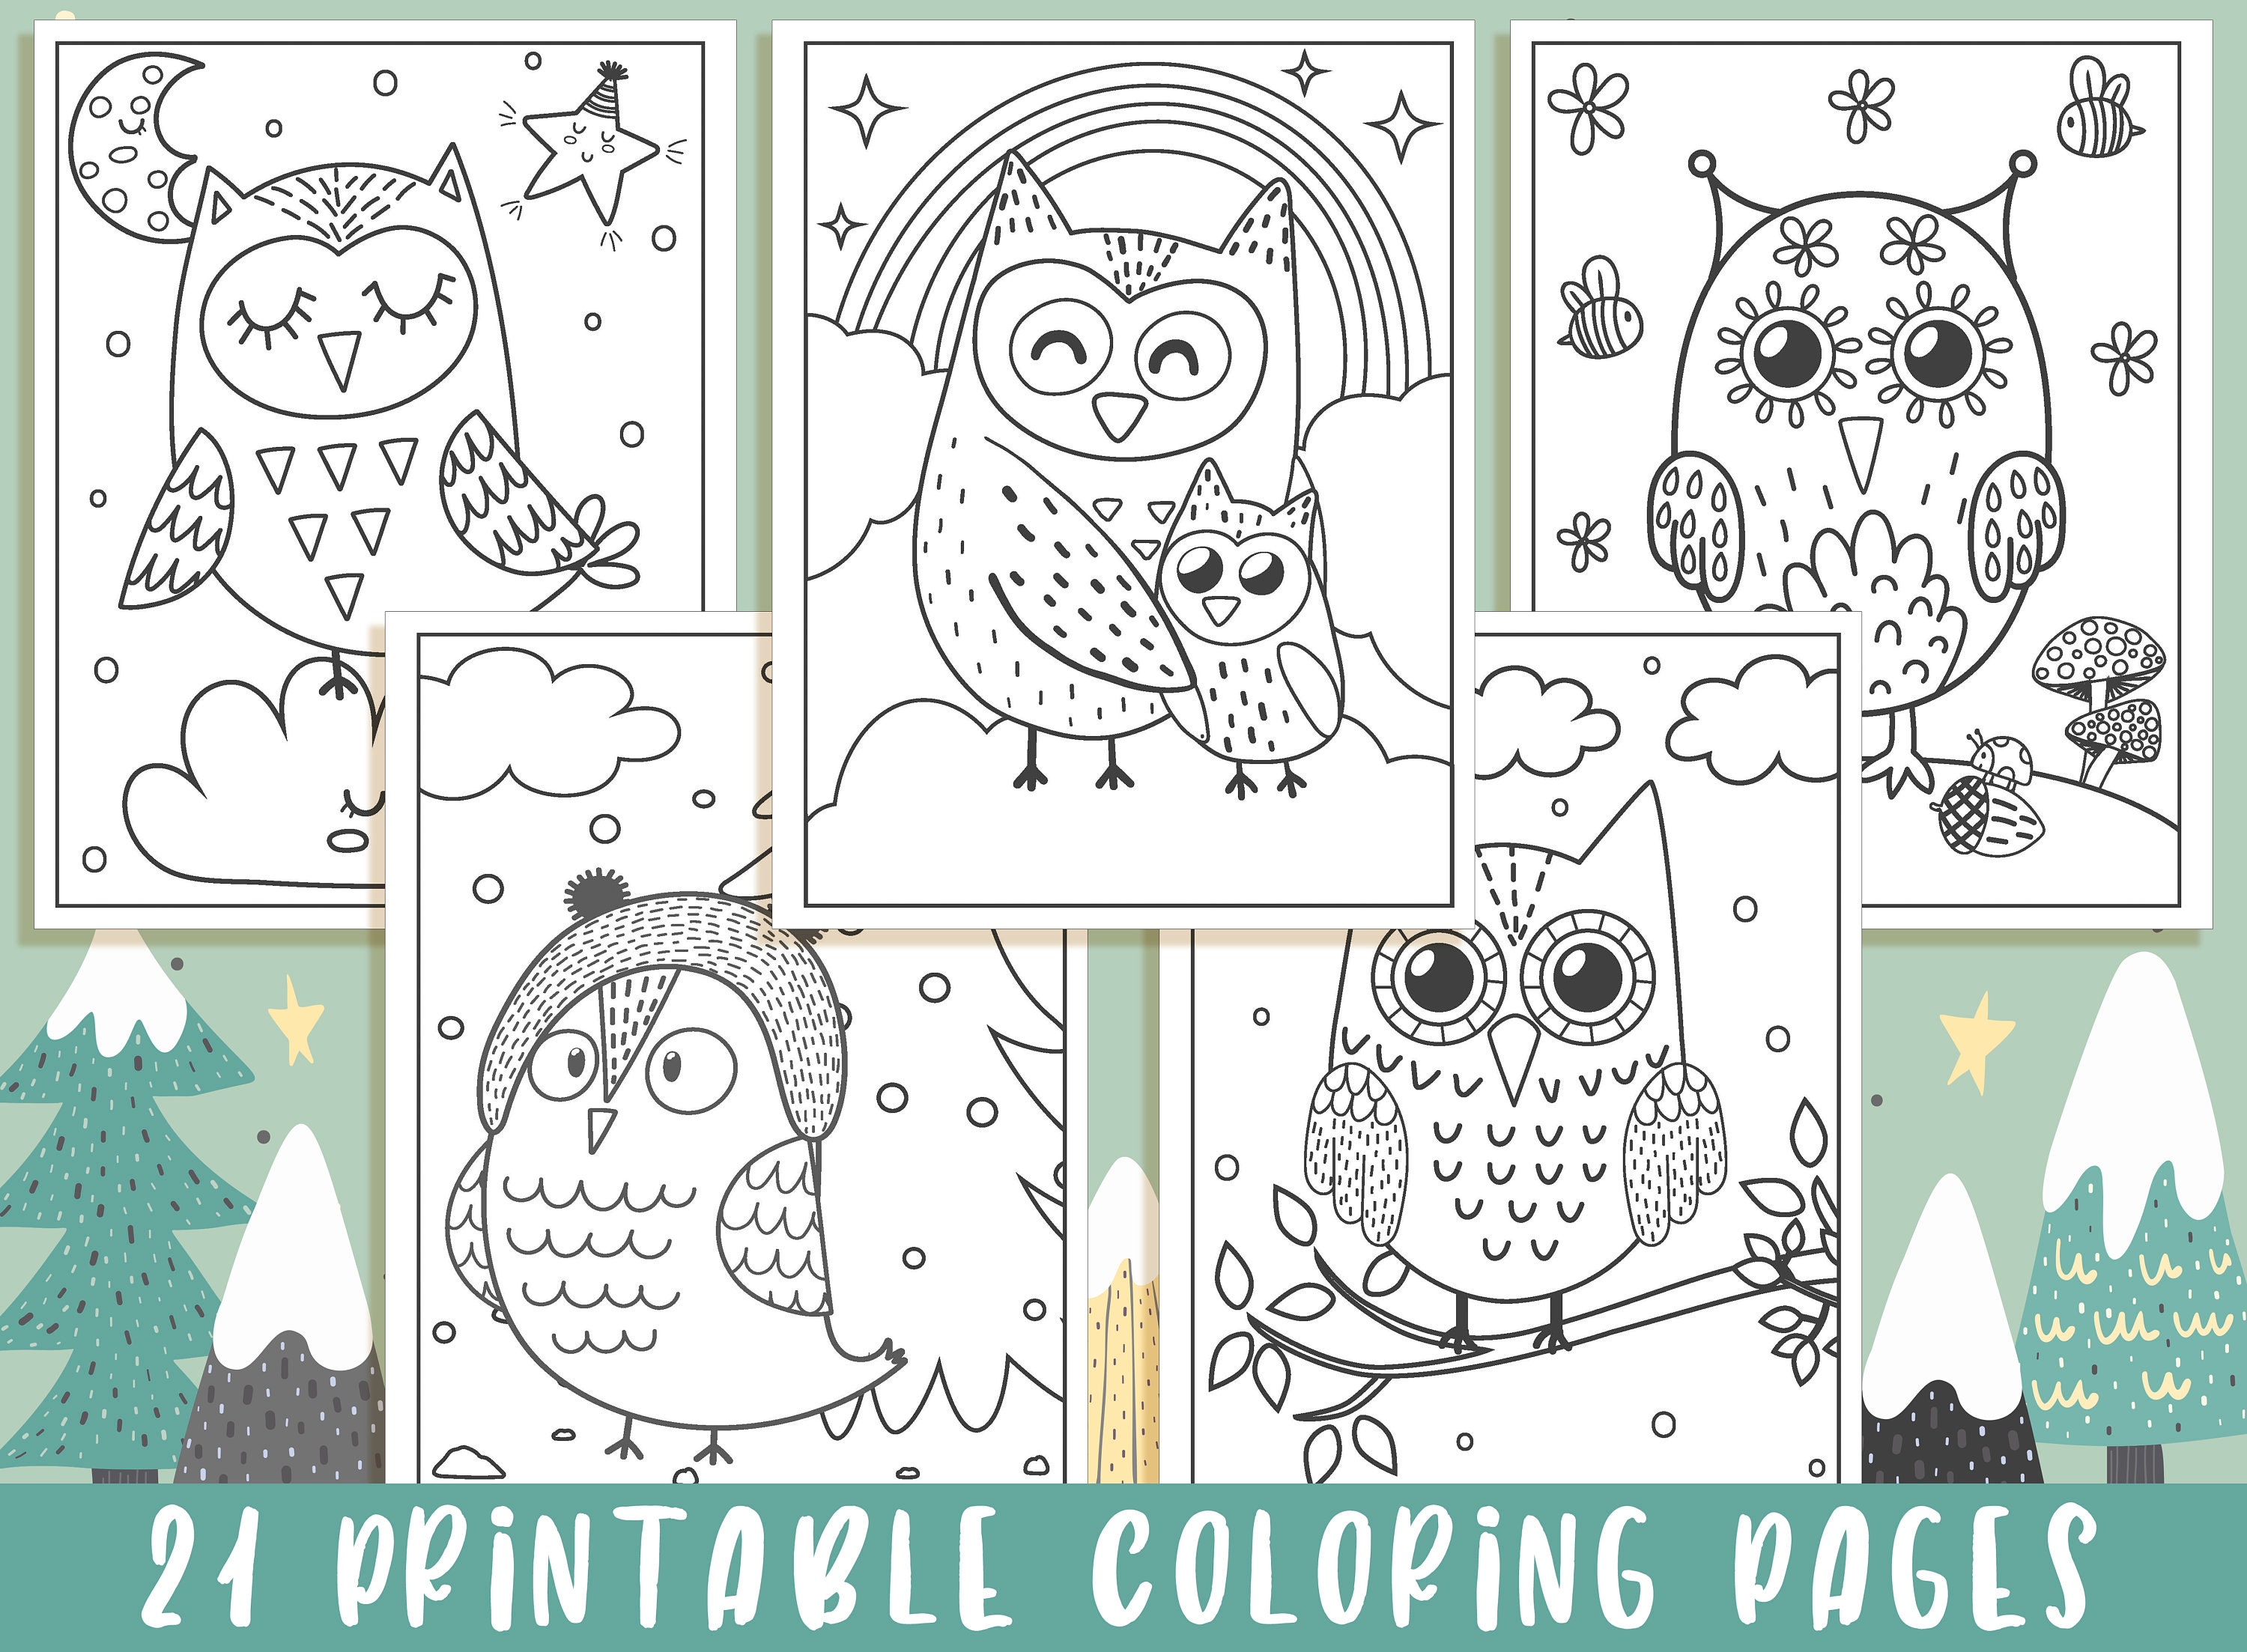 Owl coloring pages printable owl coloring pages for kids boys girls teens owl birthday party activity instant download